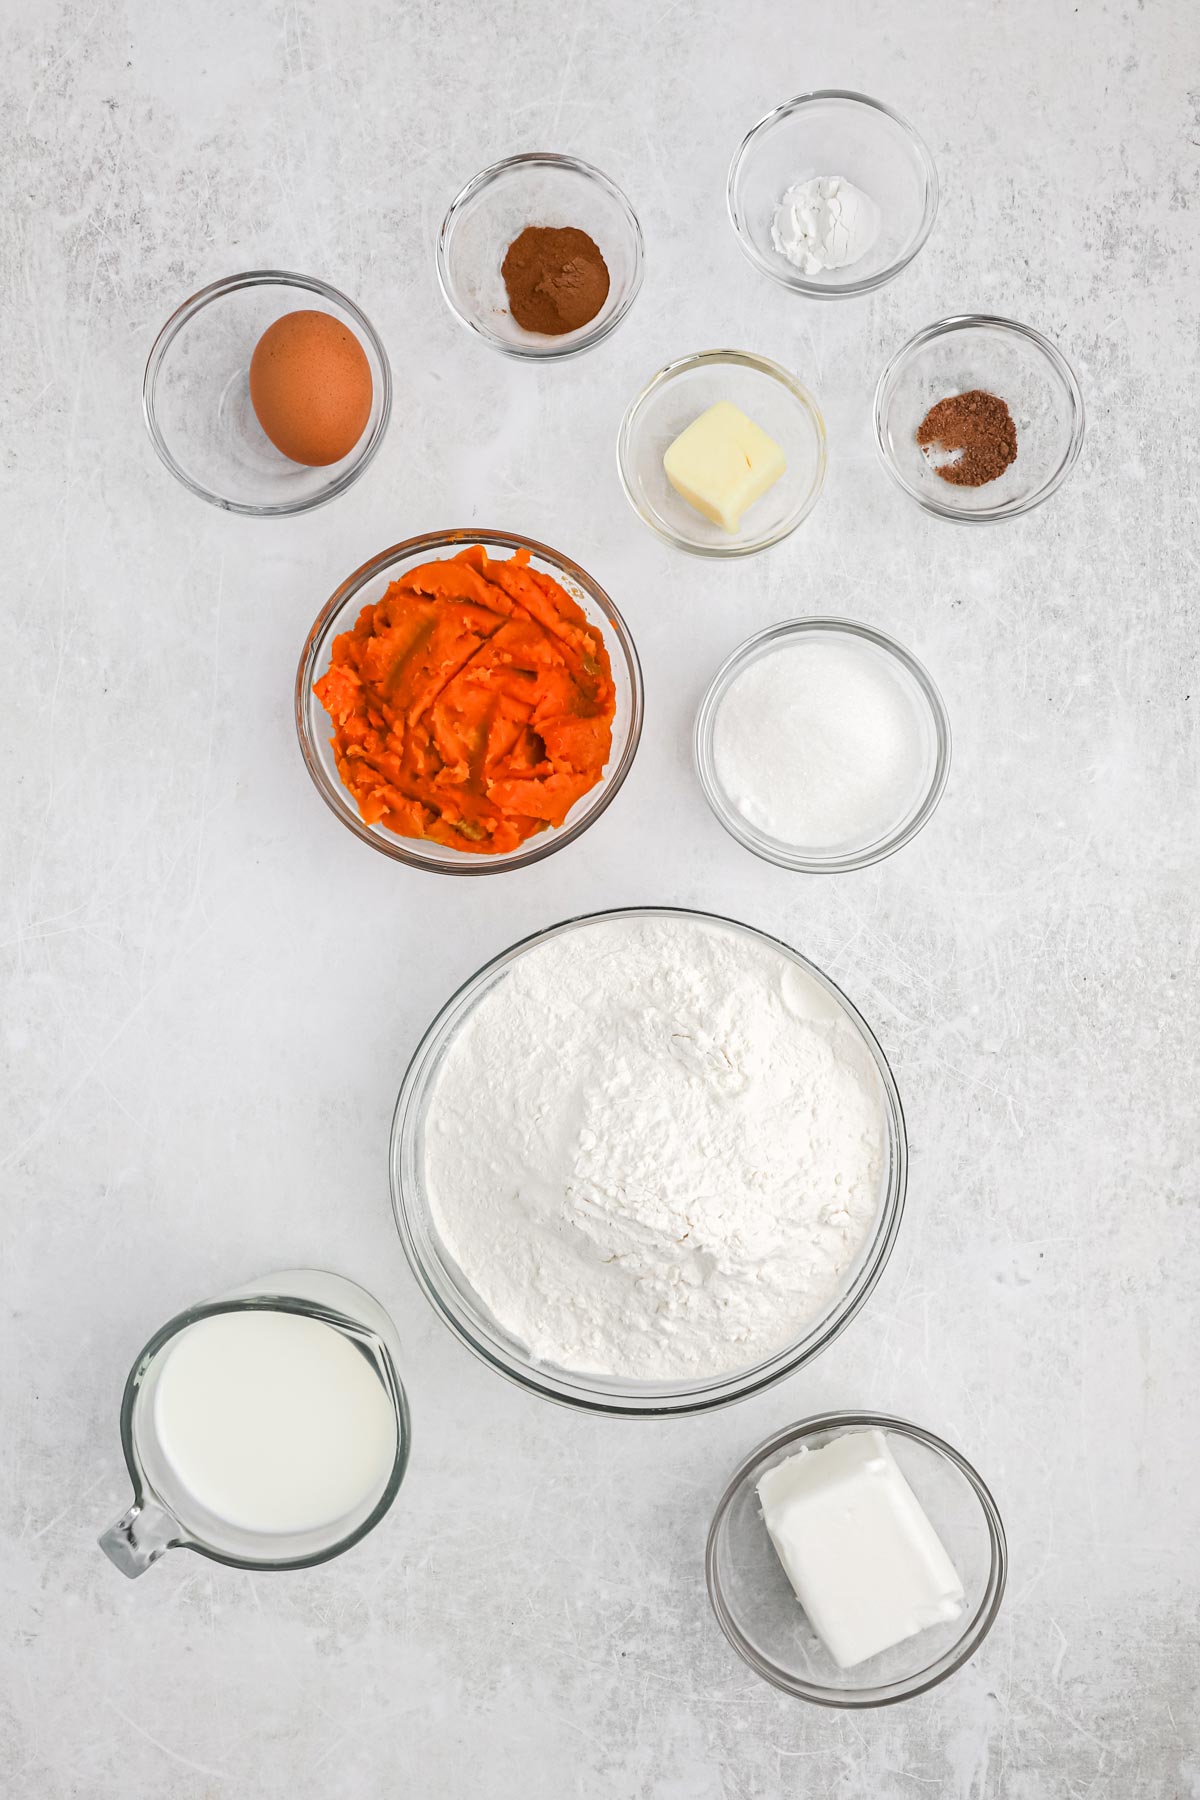 Ingredients to make sweet potato biscuits on the counter.